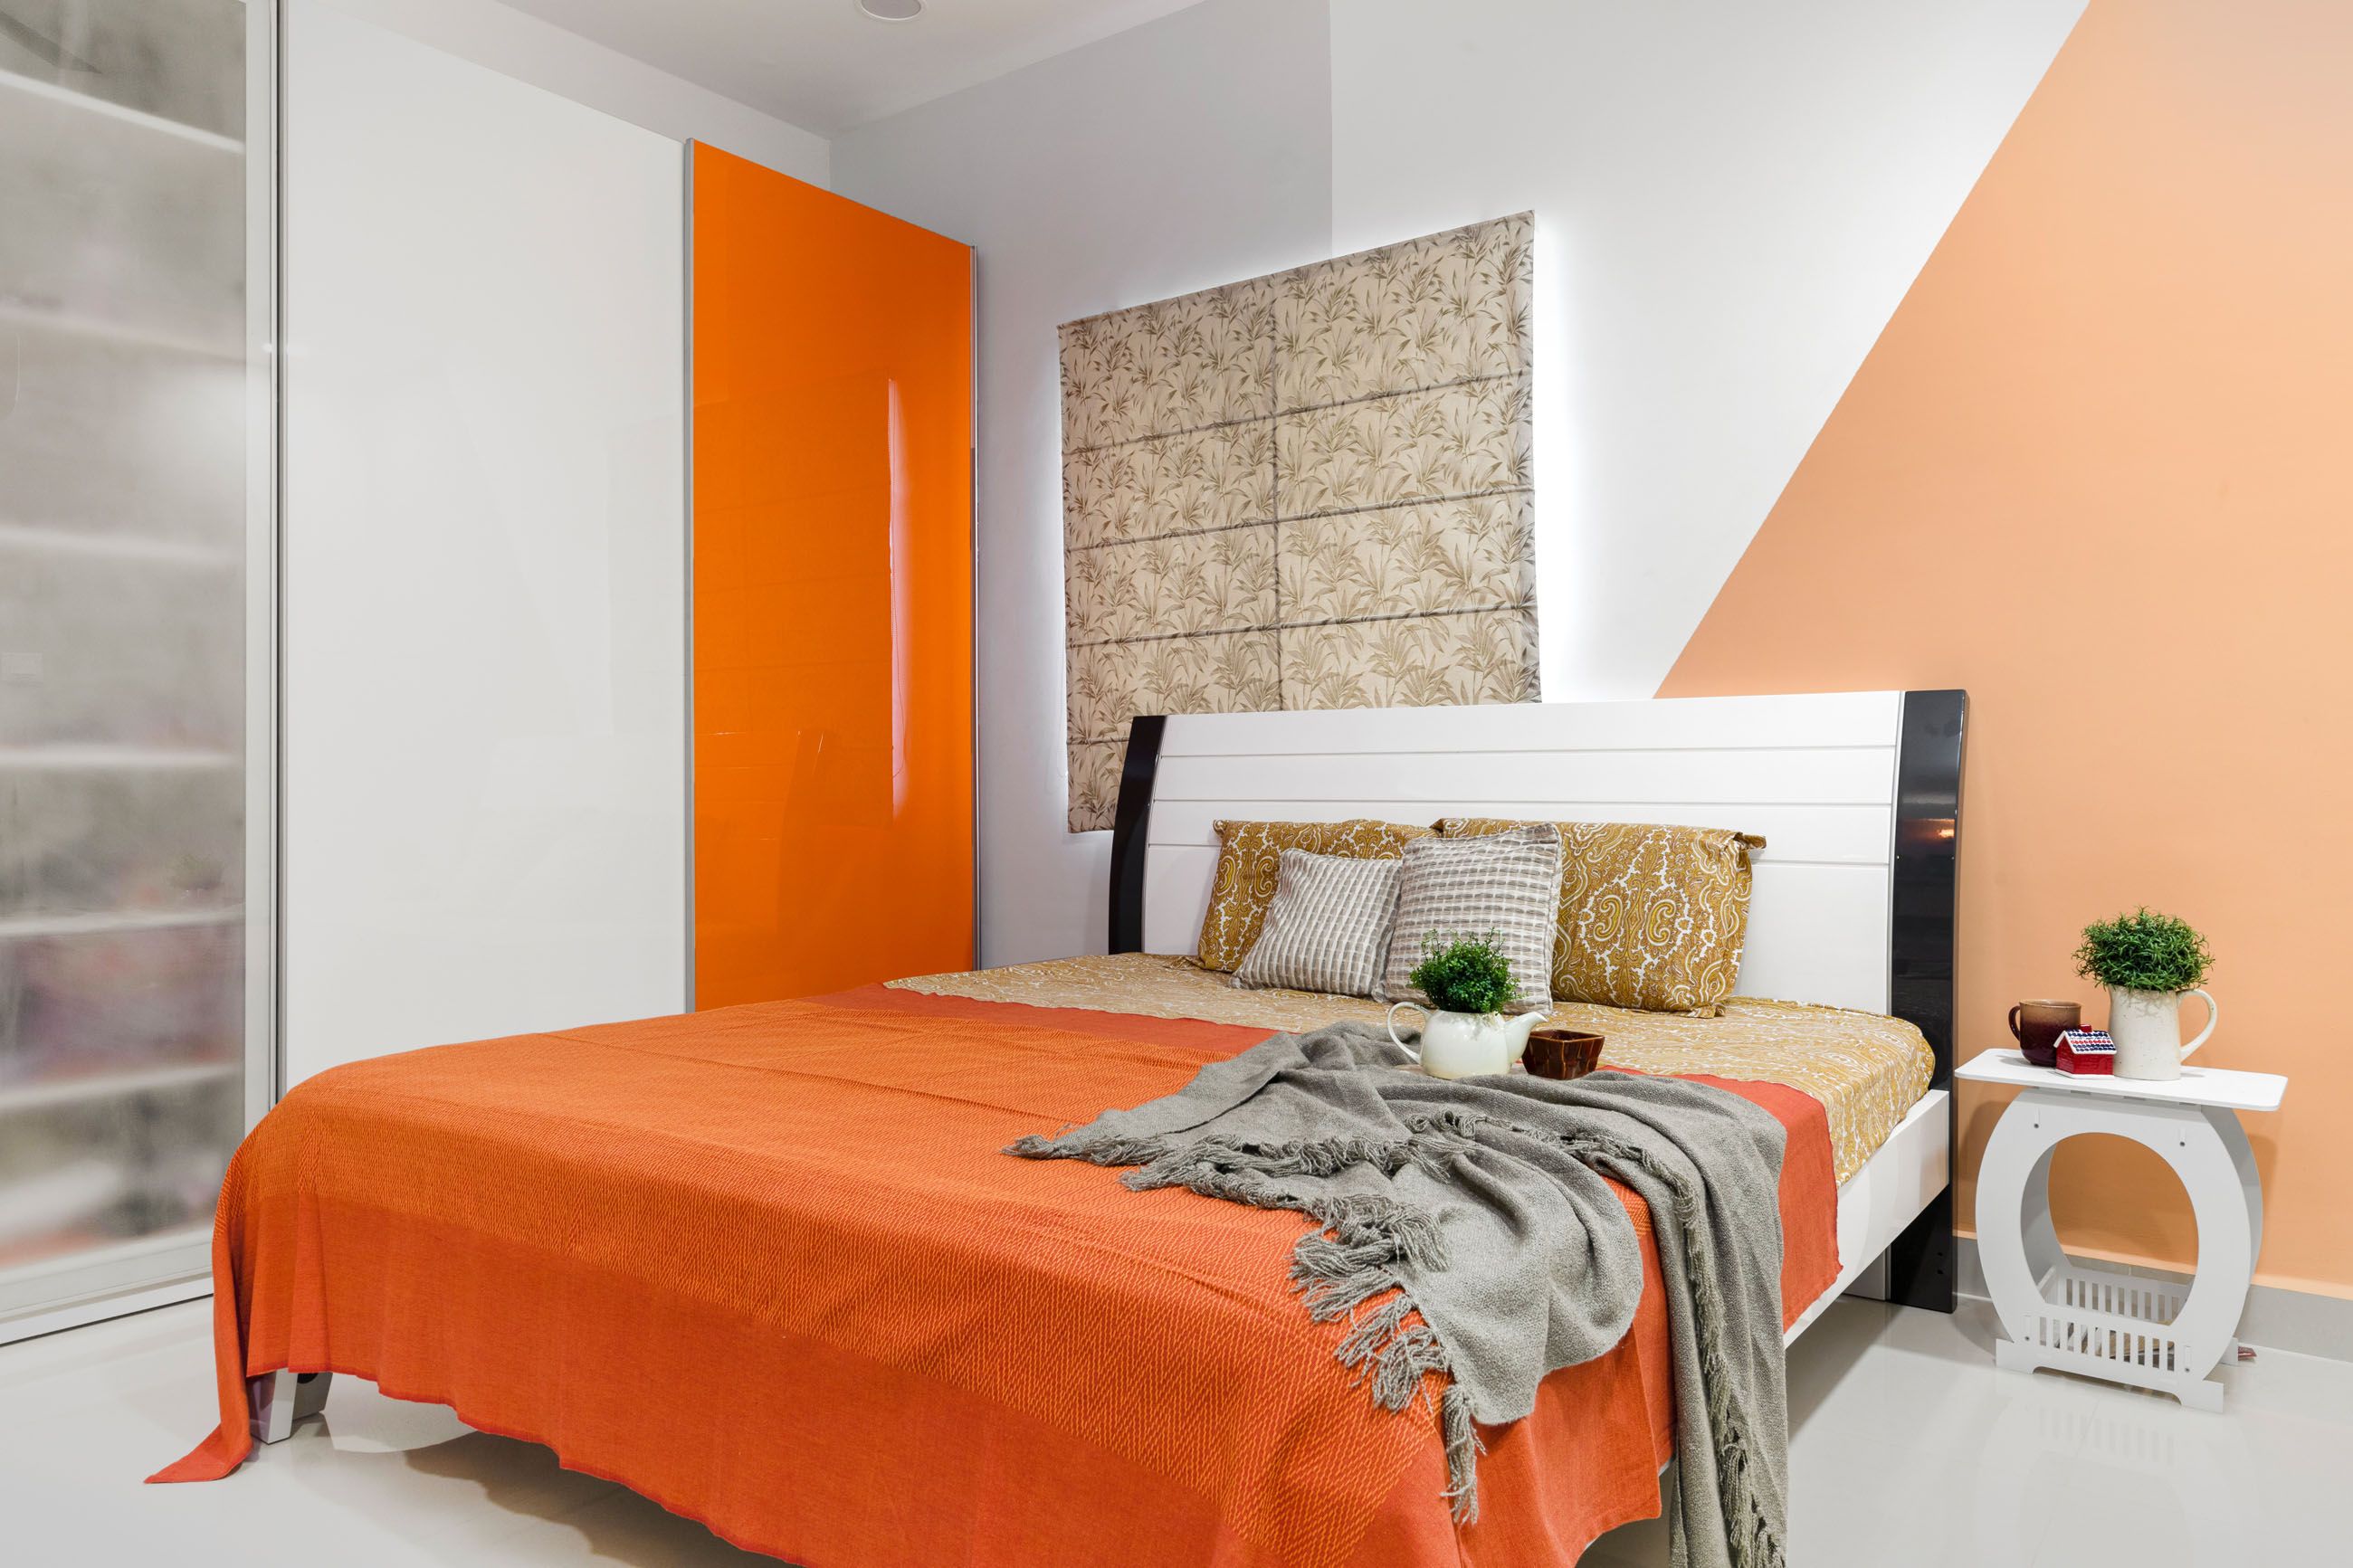 Modern Orange Master Bedroom Design With Tri-Toned Accent Wall And 3-Door Sliding Wardrobe